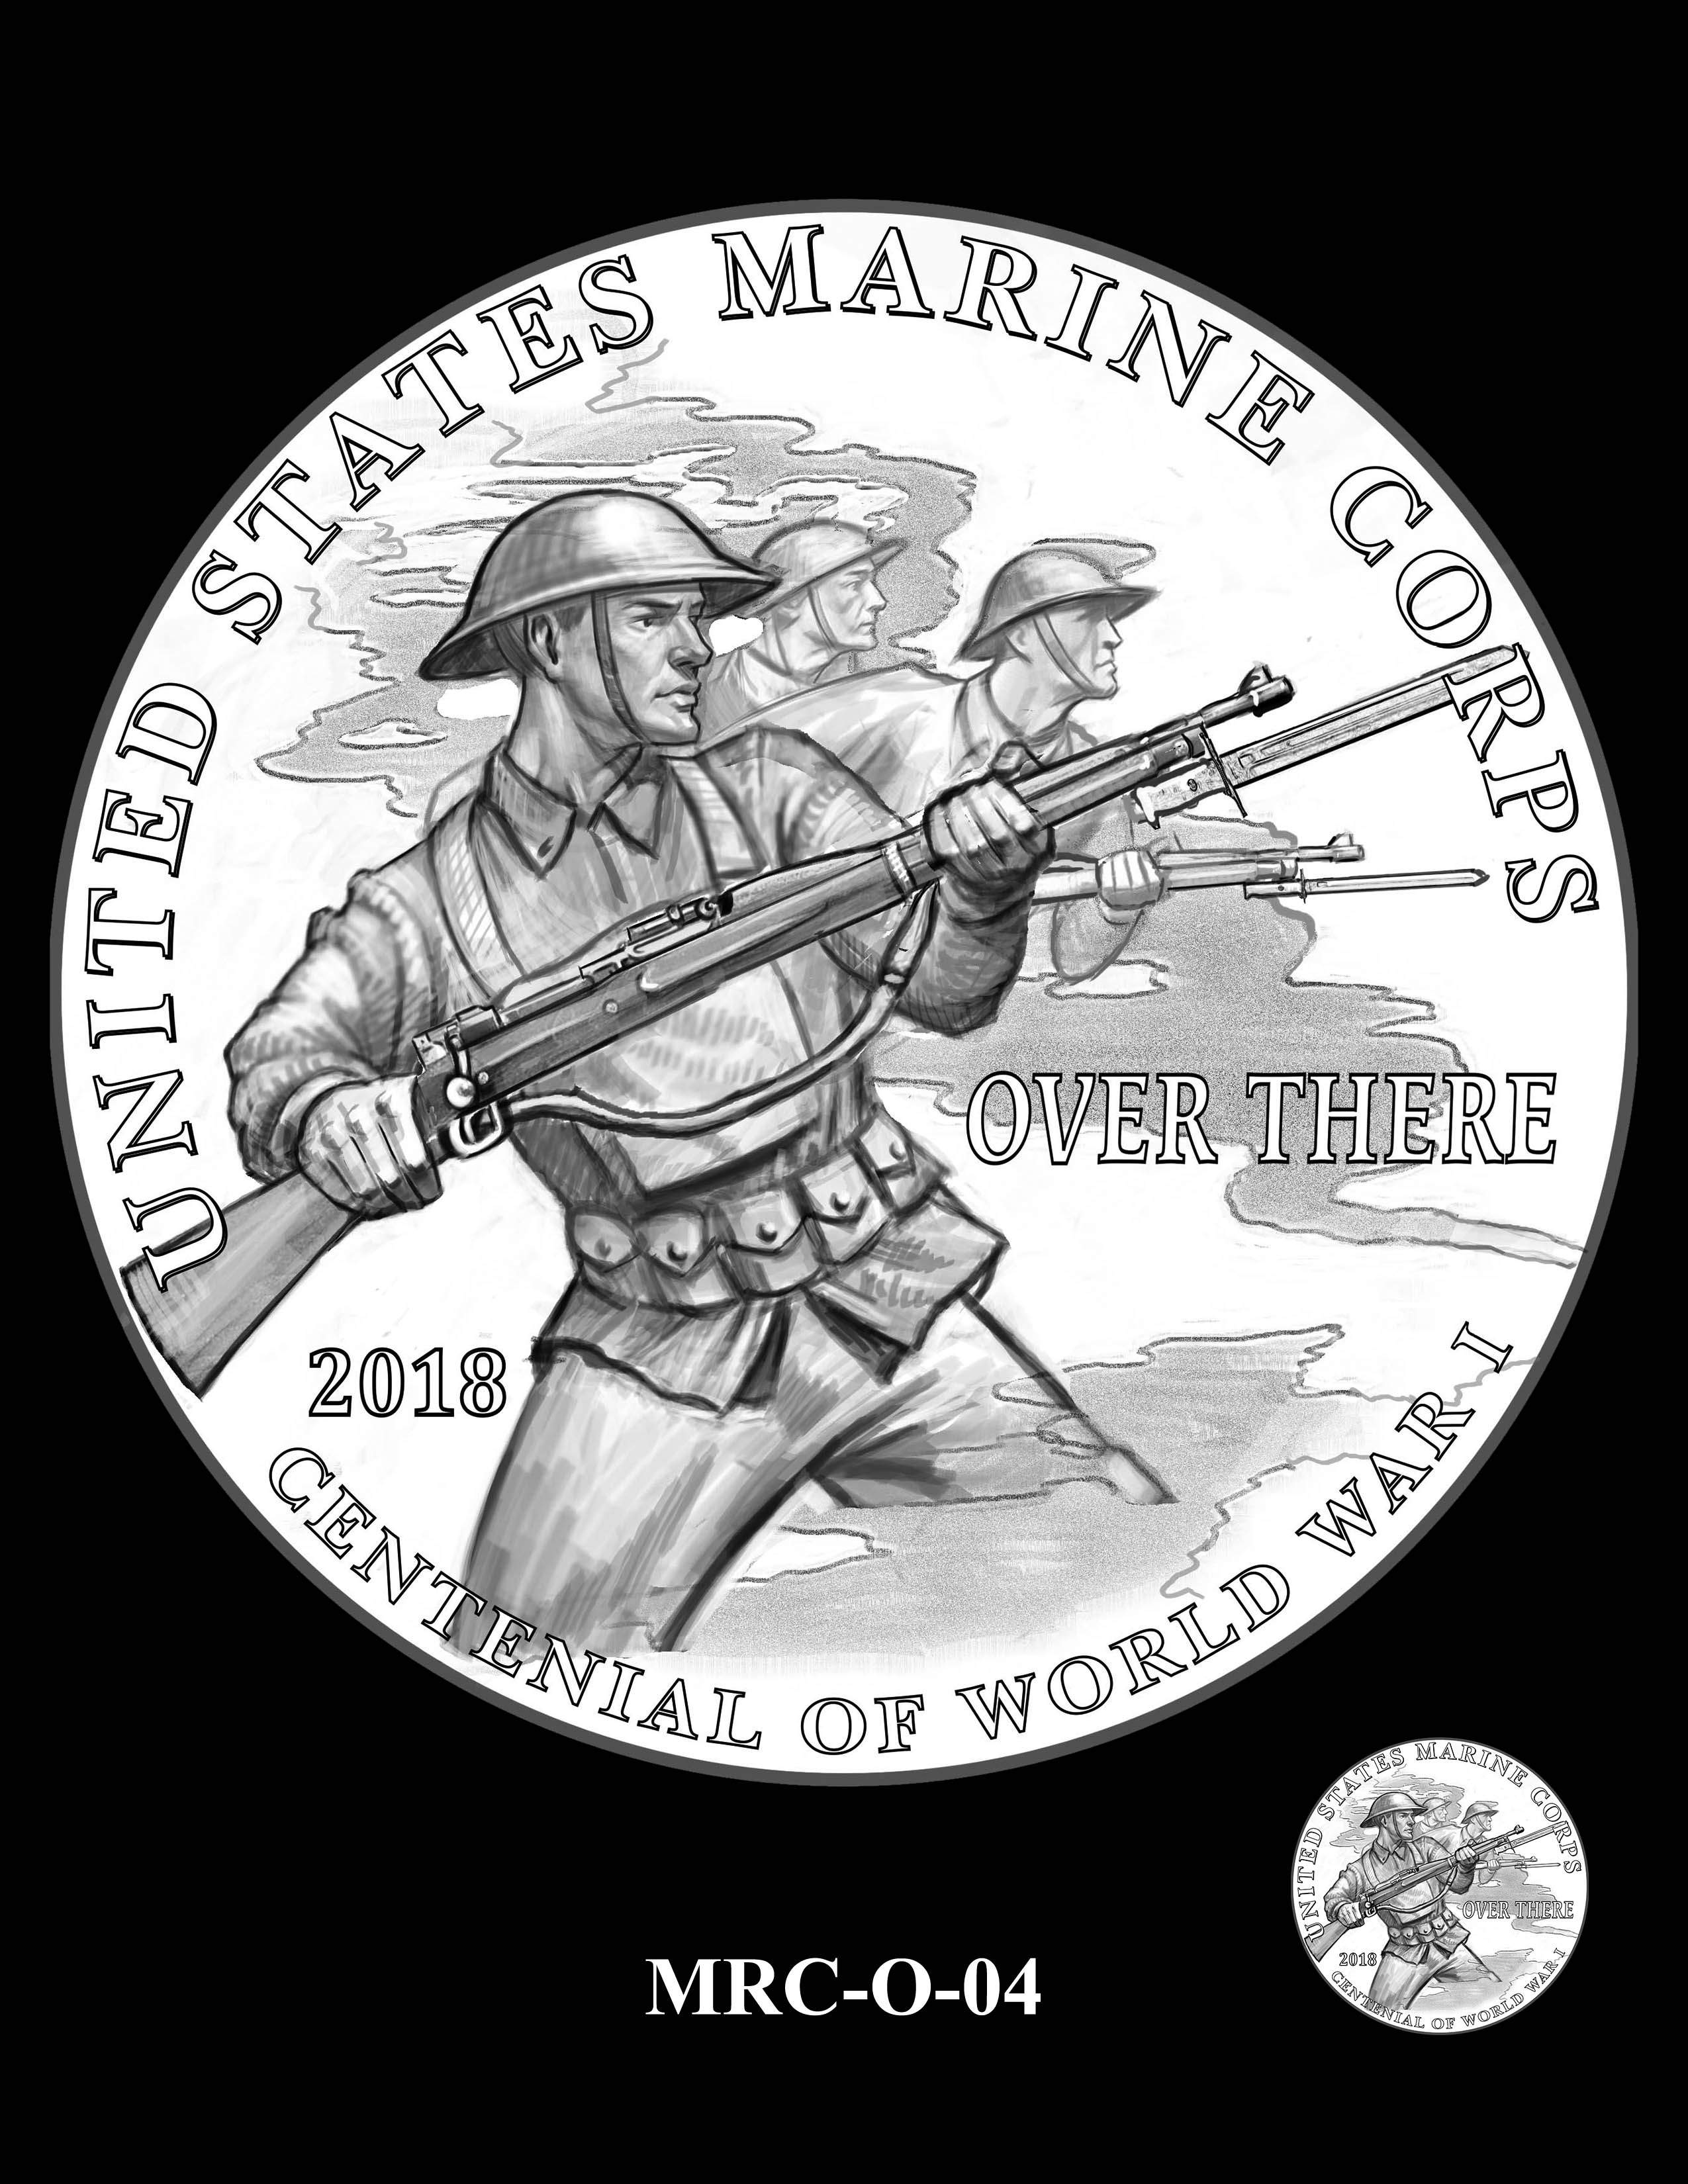 P1-MRC-O-04 -- 2018 World War I Armed Forces Silver Medals - Marine Corps